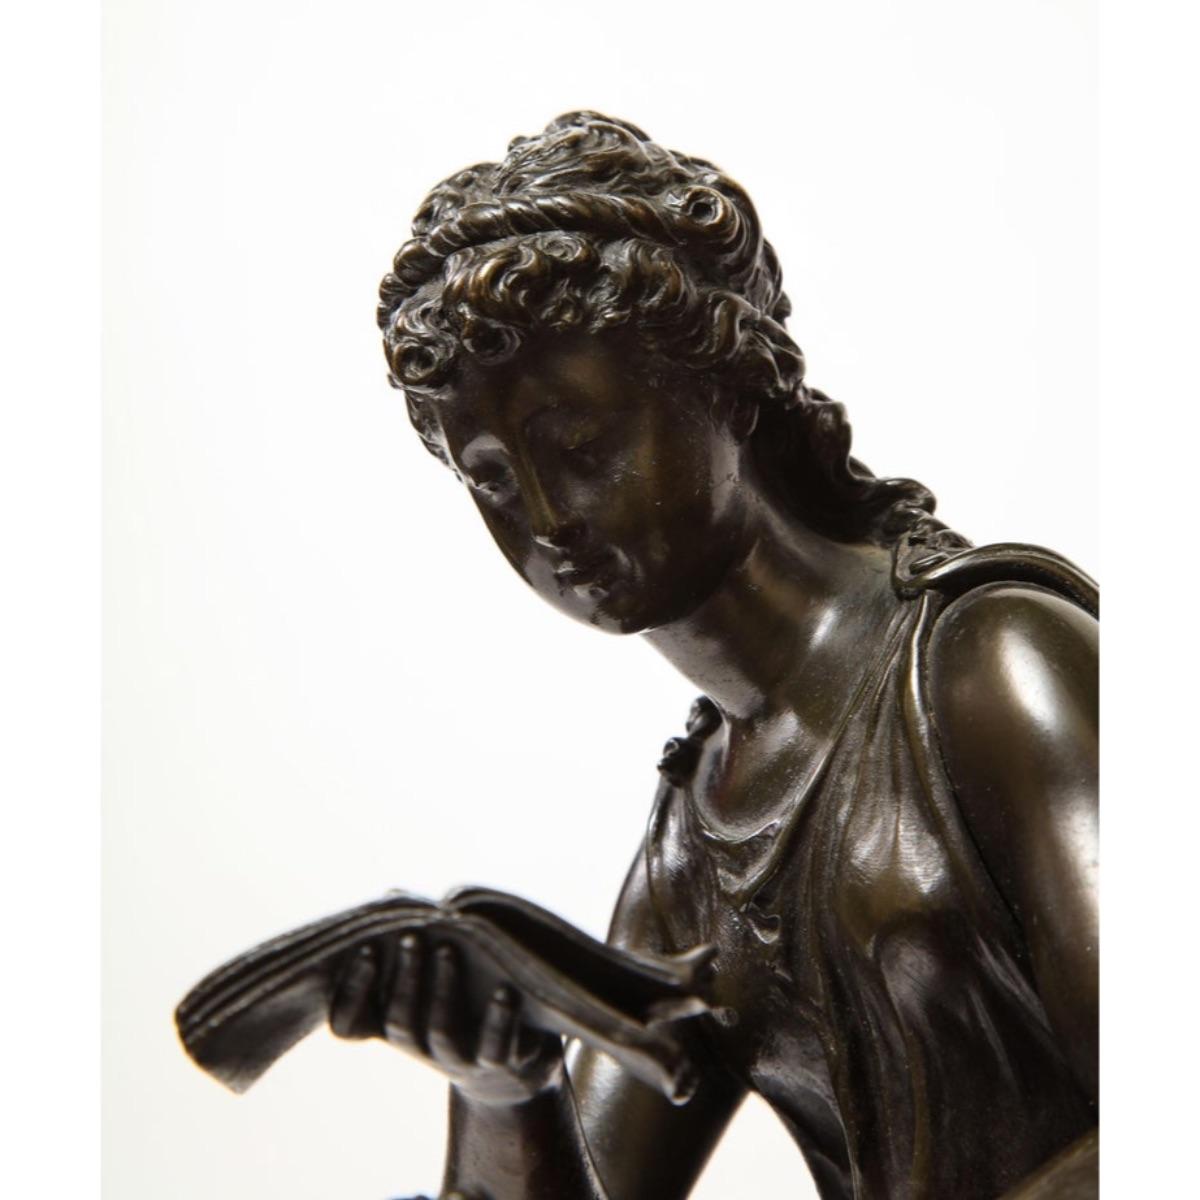 Exquisite French Bronze, Rouge Marble, and Sèvres Style Porcelain Sculpture - Gold Figurative Sculpture by Mathurin Moreau